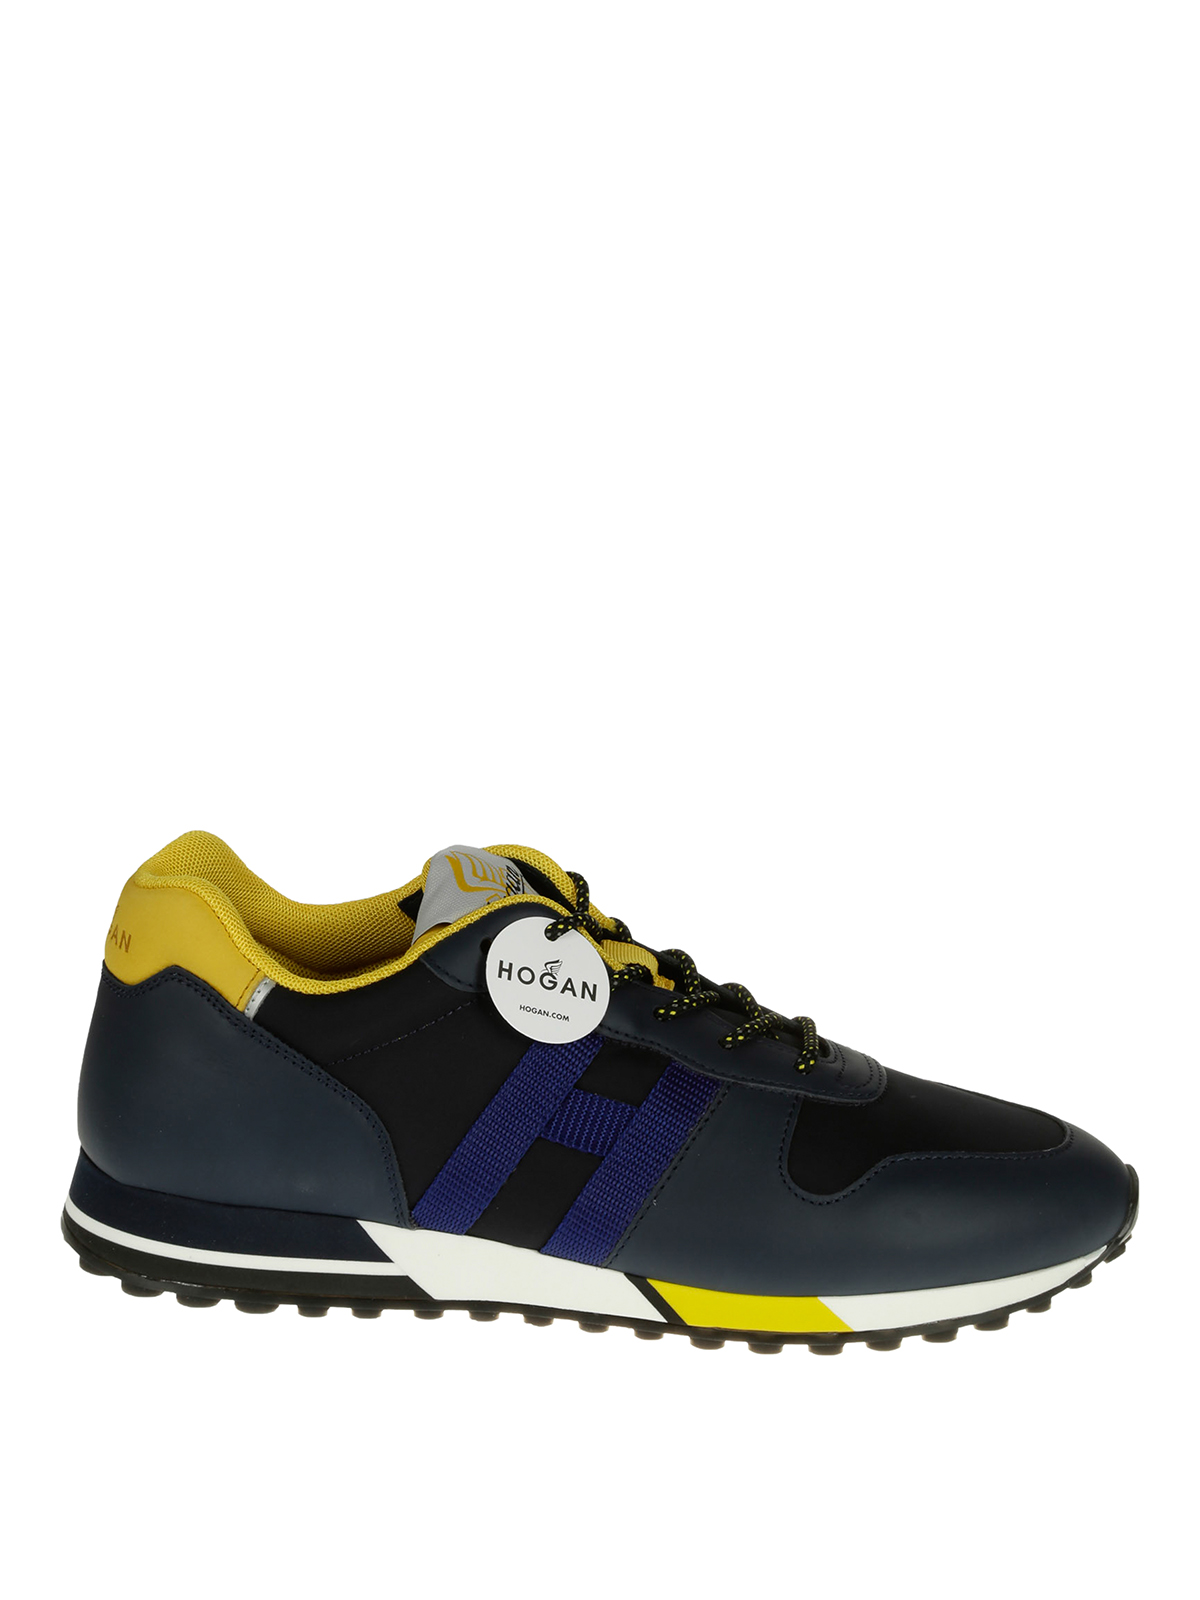 Trainers Hogan - H383 sneakers - HXM3830AN51R6D77WW | Shop online at iKRIX